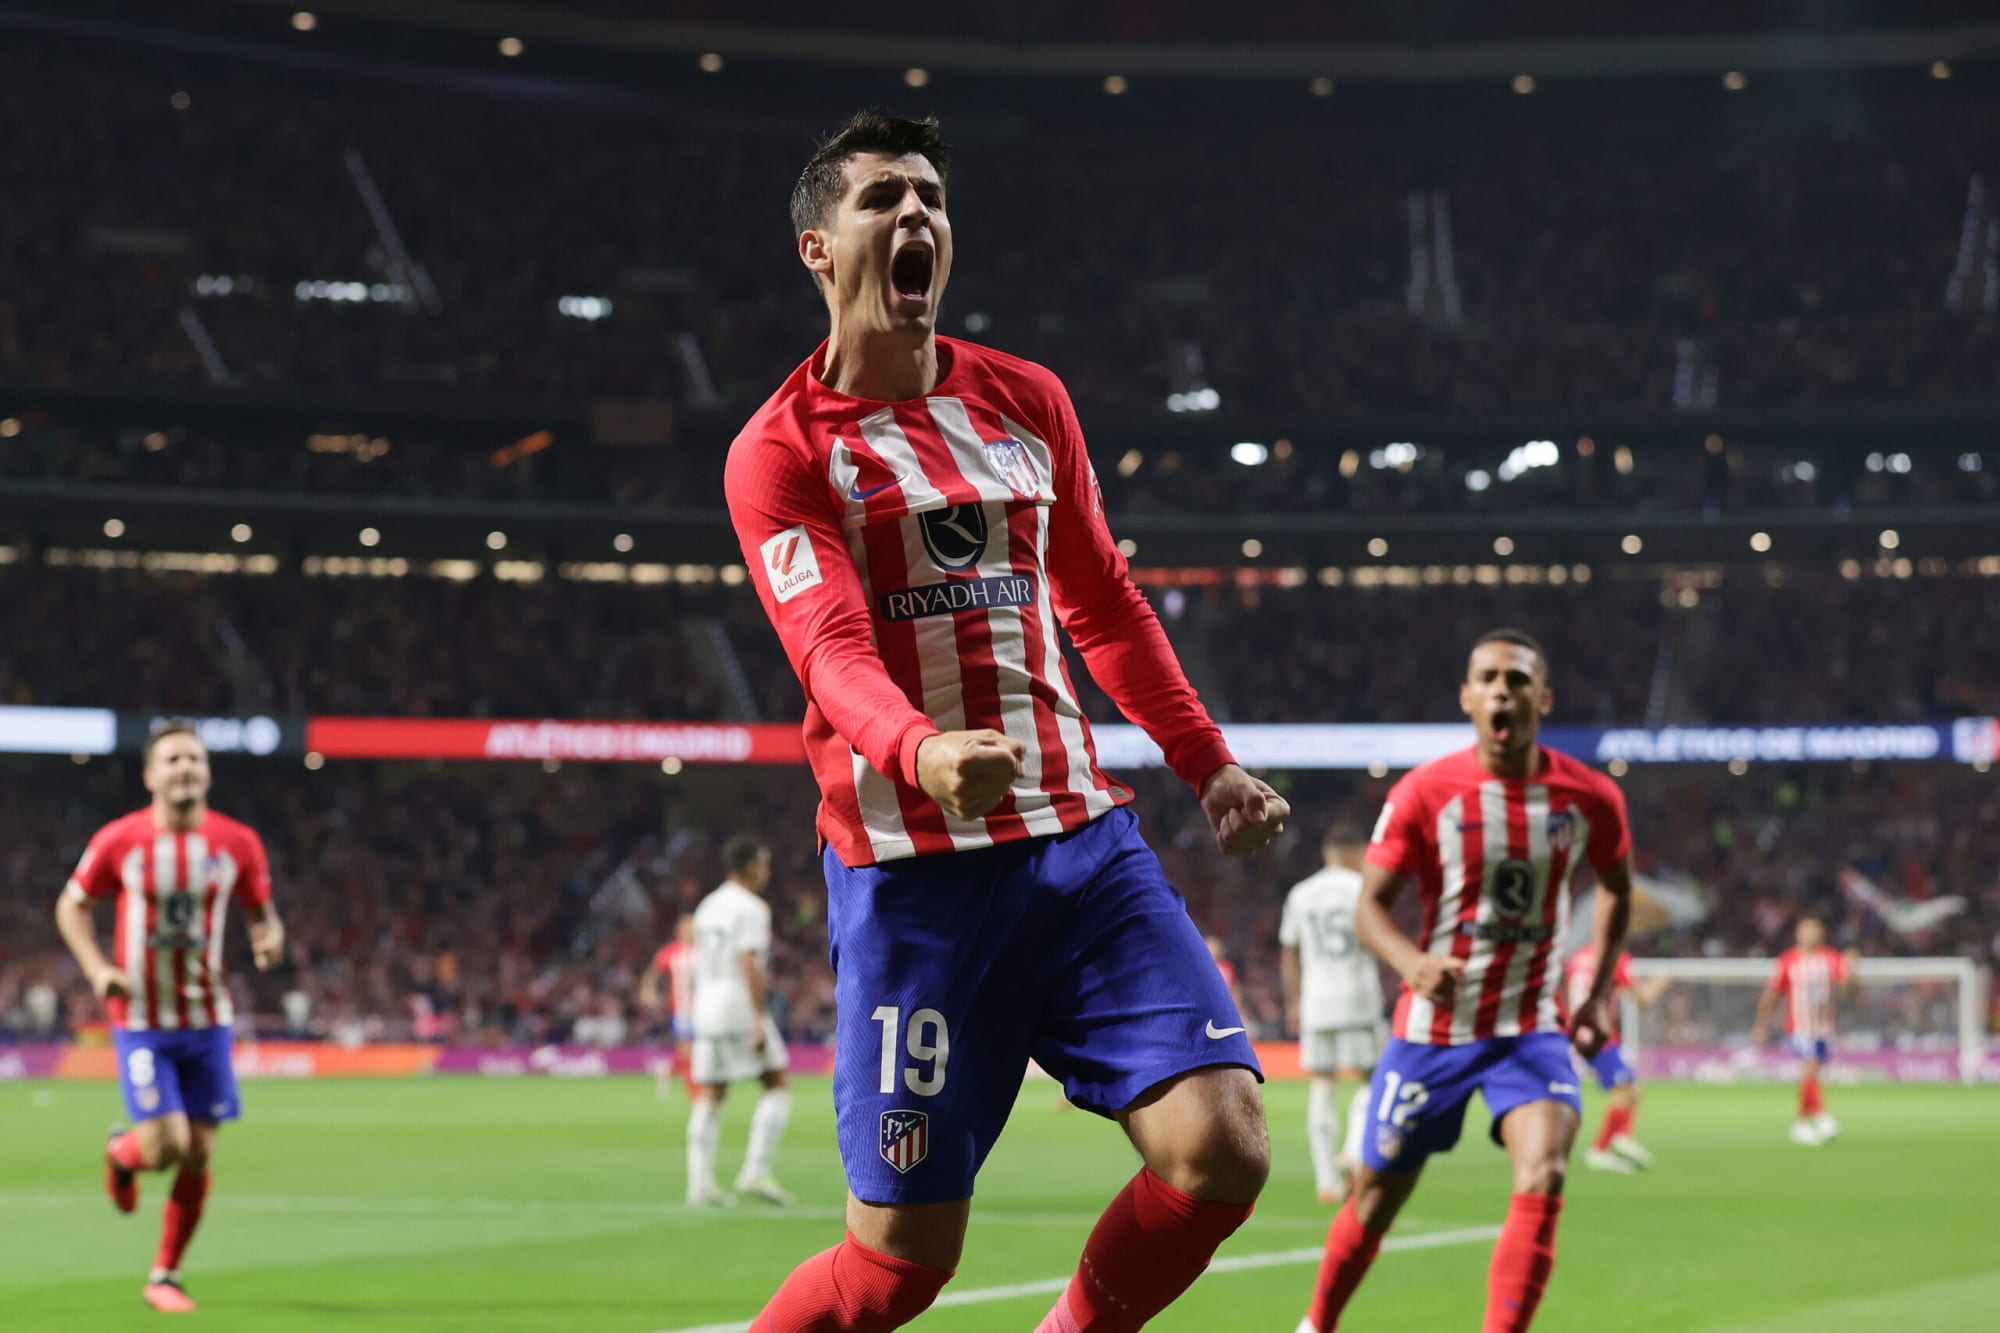 Atletico Madrid beat Real Madrid 3-1 in the derby